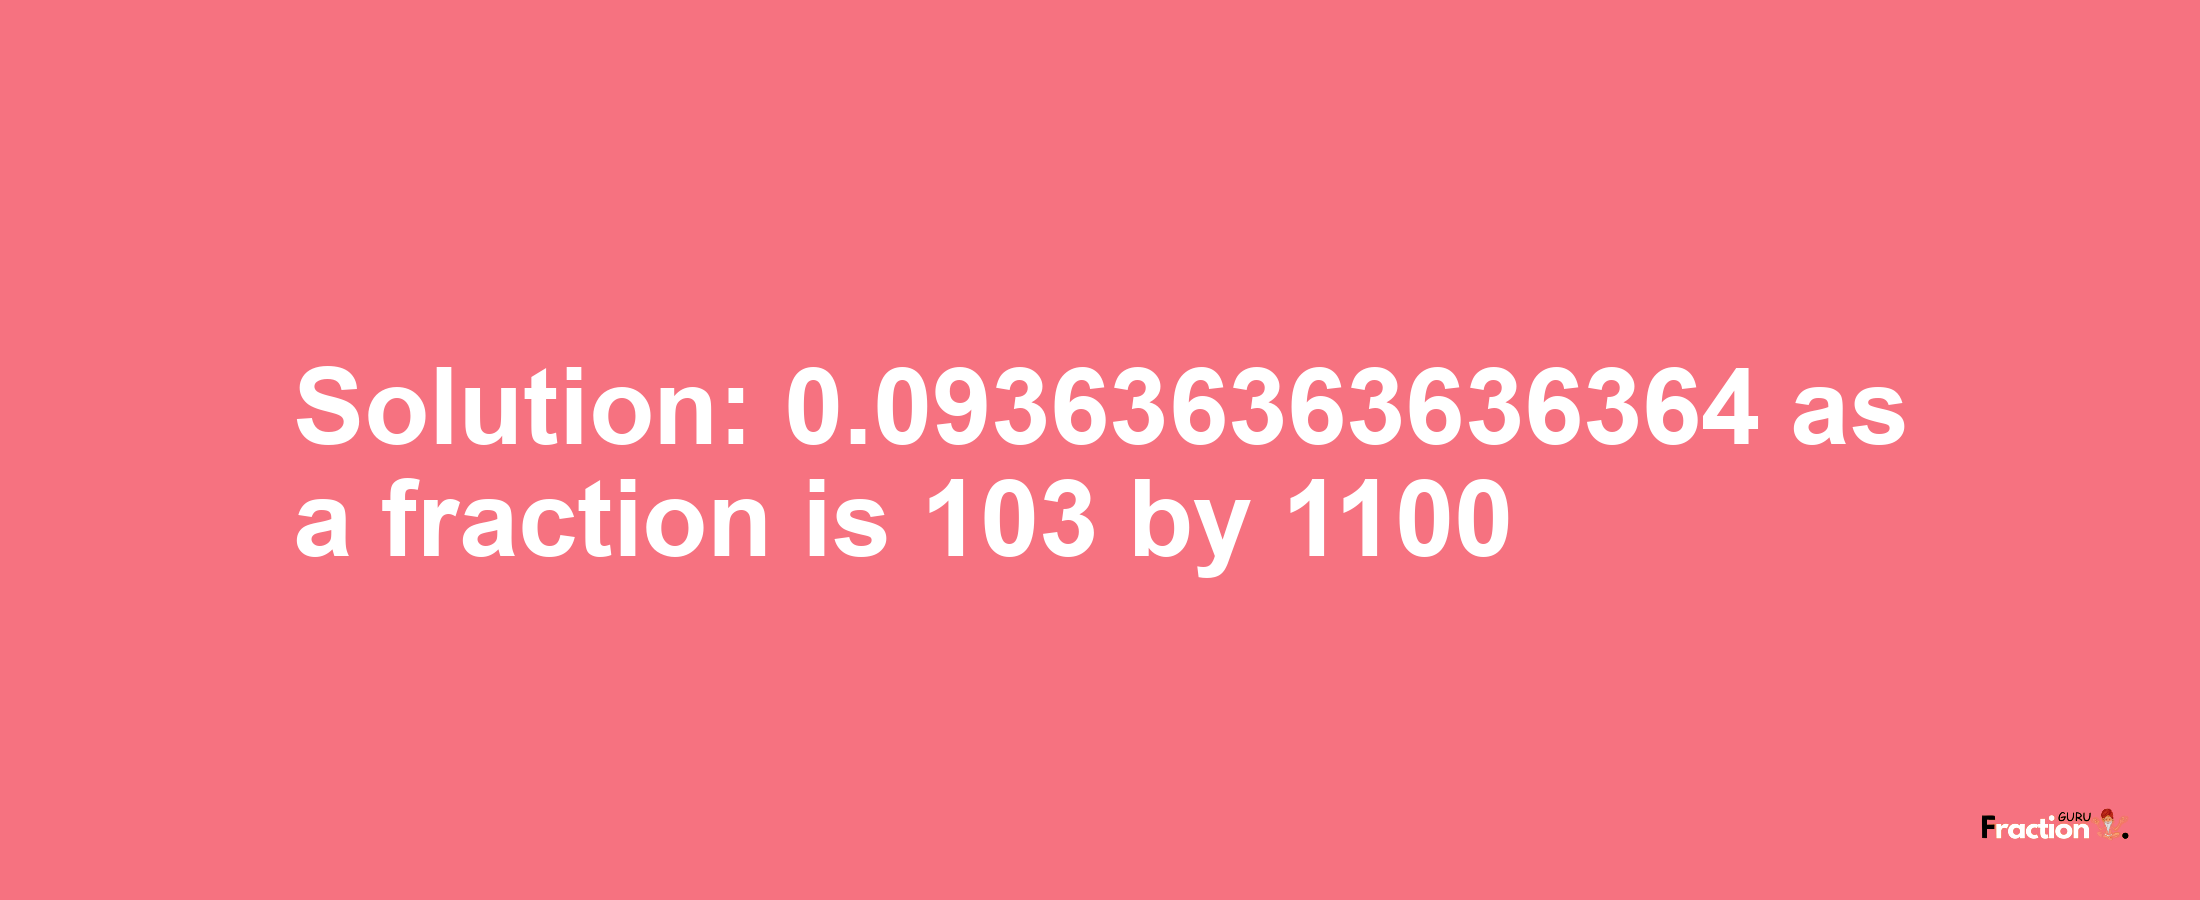 Solution:0.093636363636364 as a fraction is 103/1100